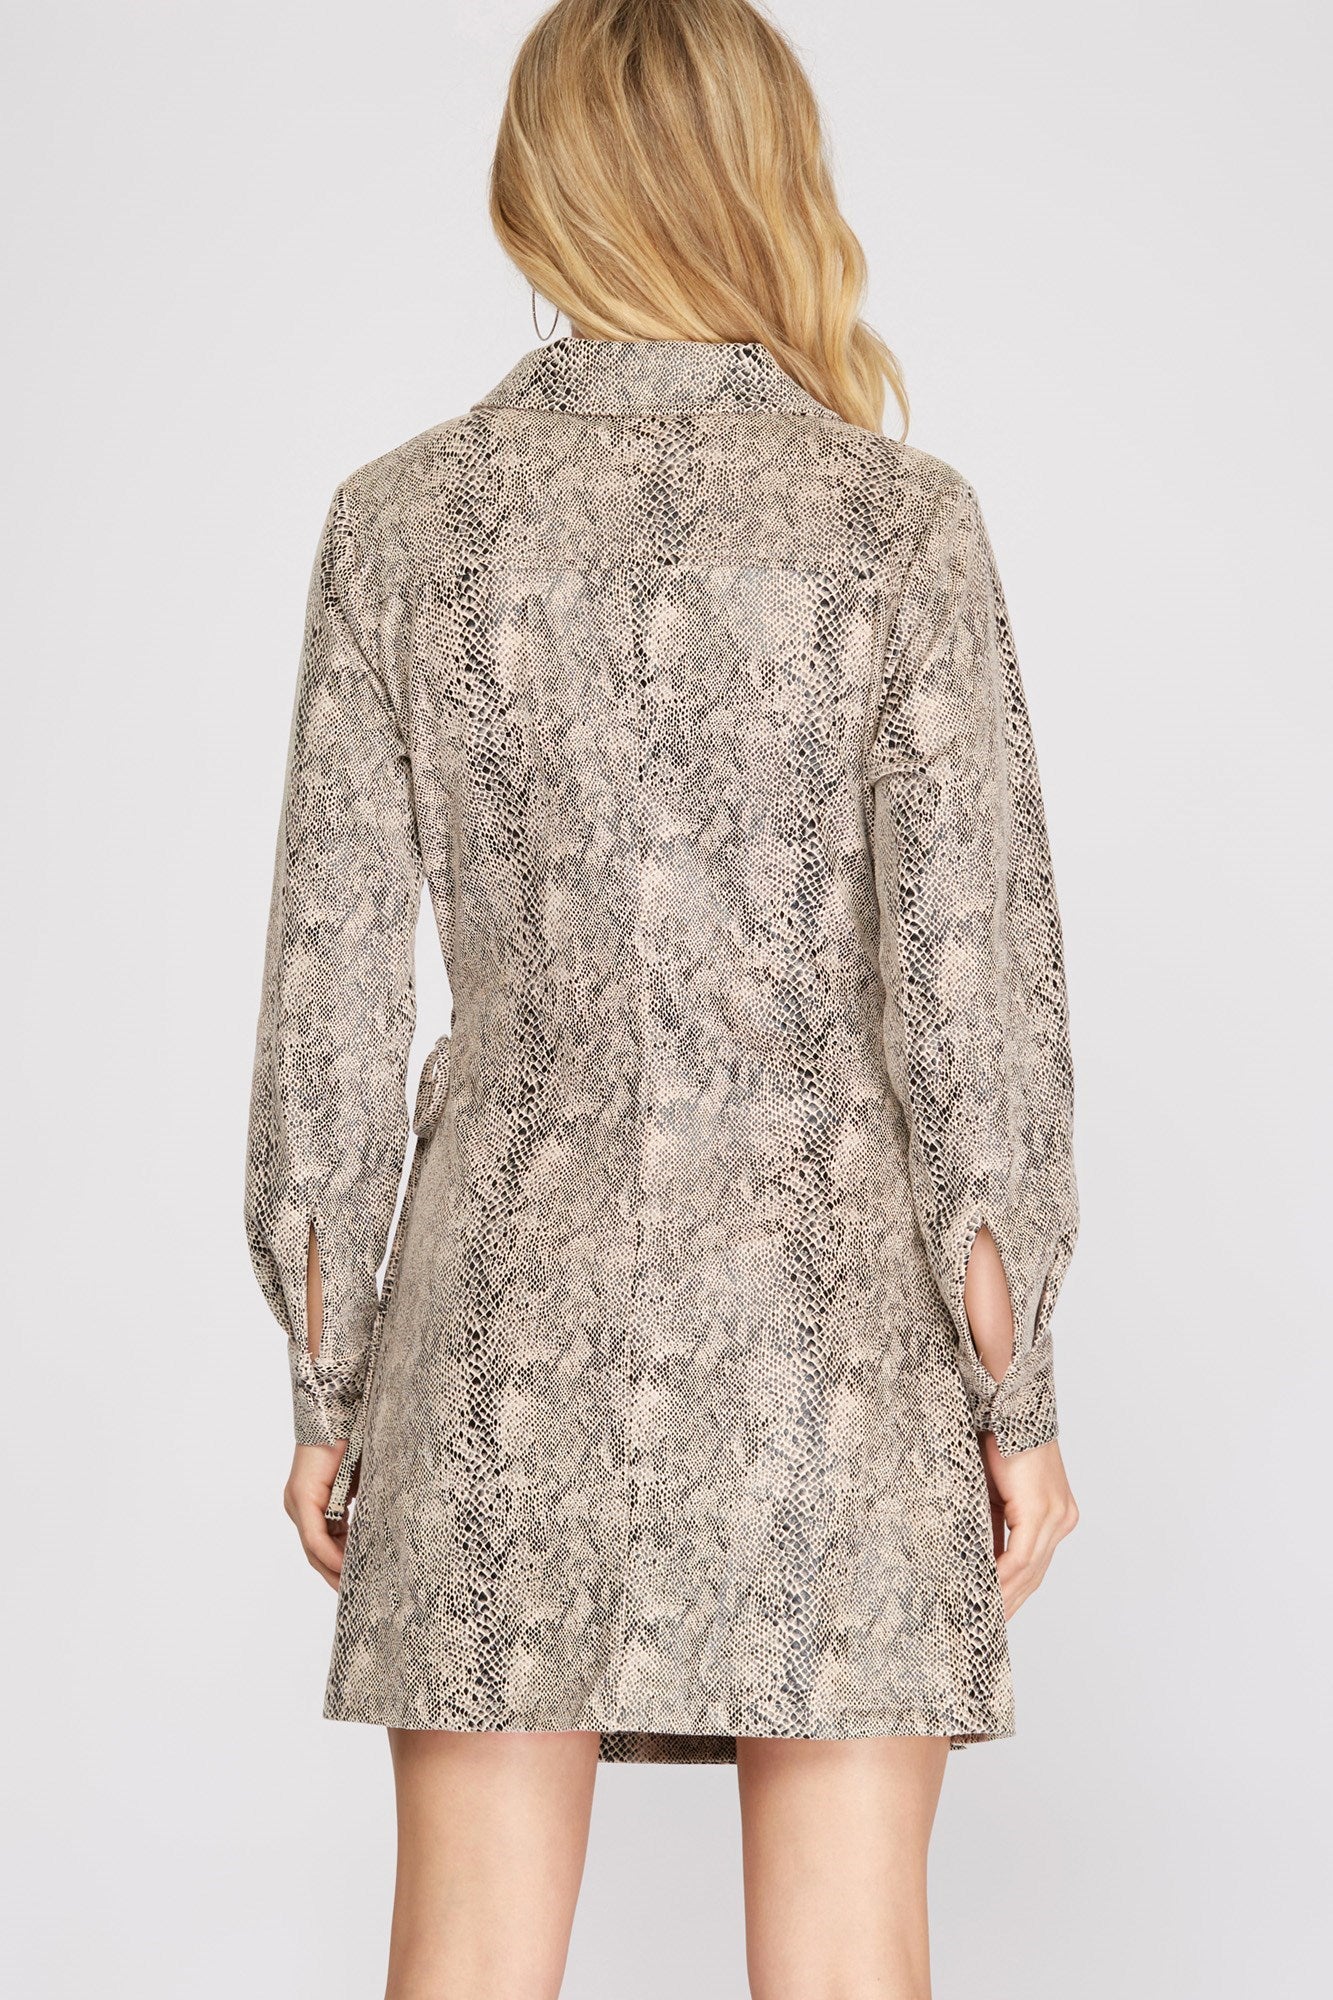 GIVE ME ALL YOUR LOVE Snakeskin dress